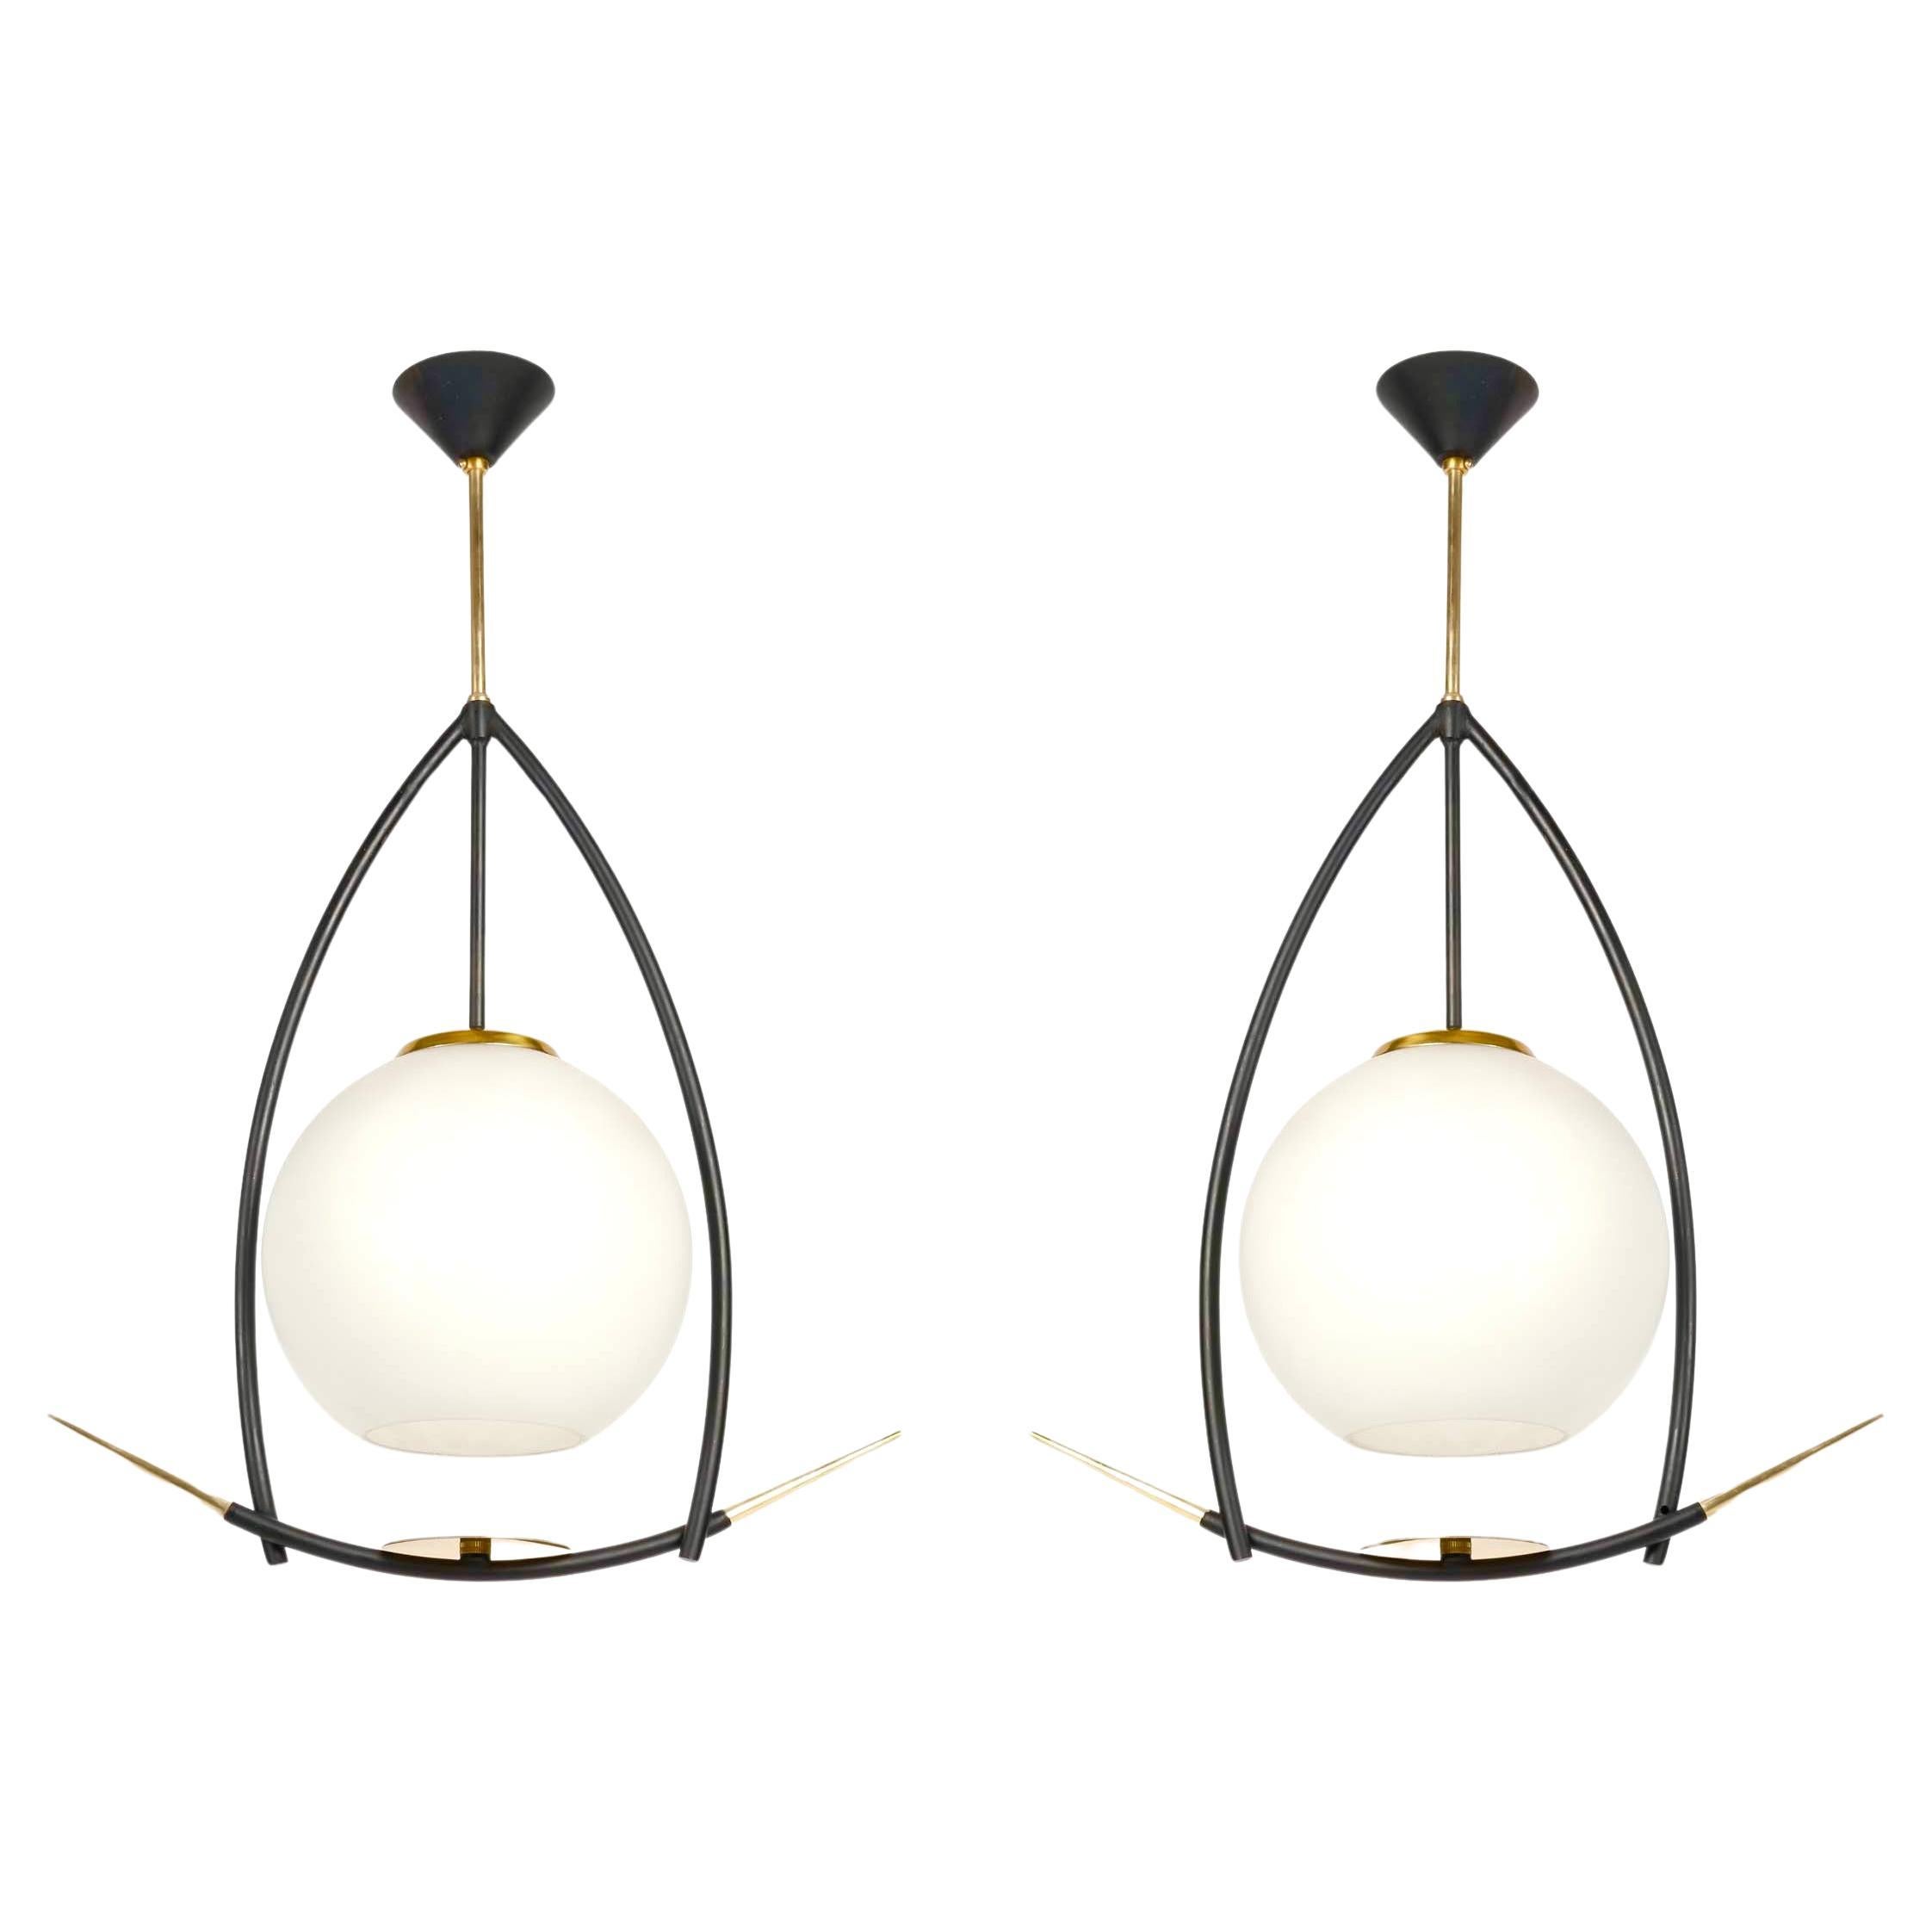 1950 Pair of chandeliers from Maison Arlus